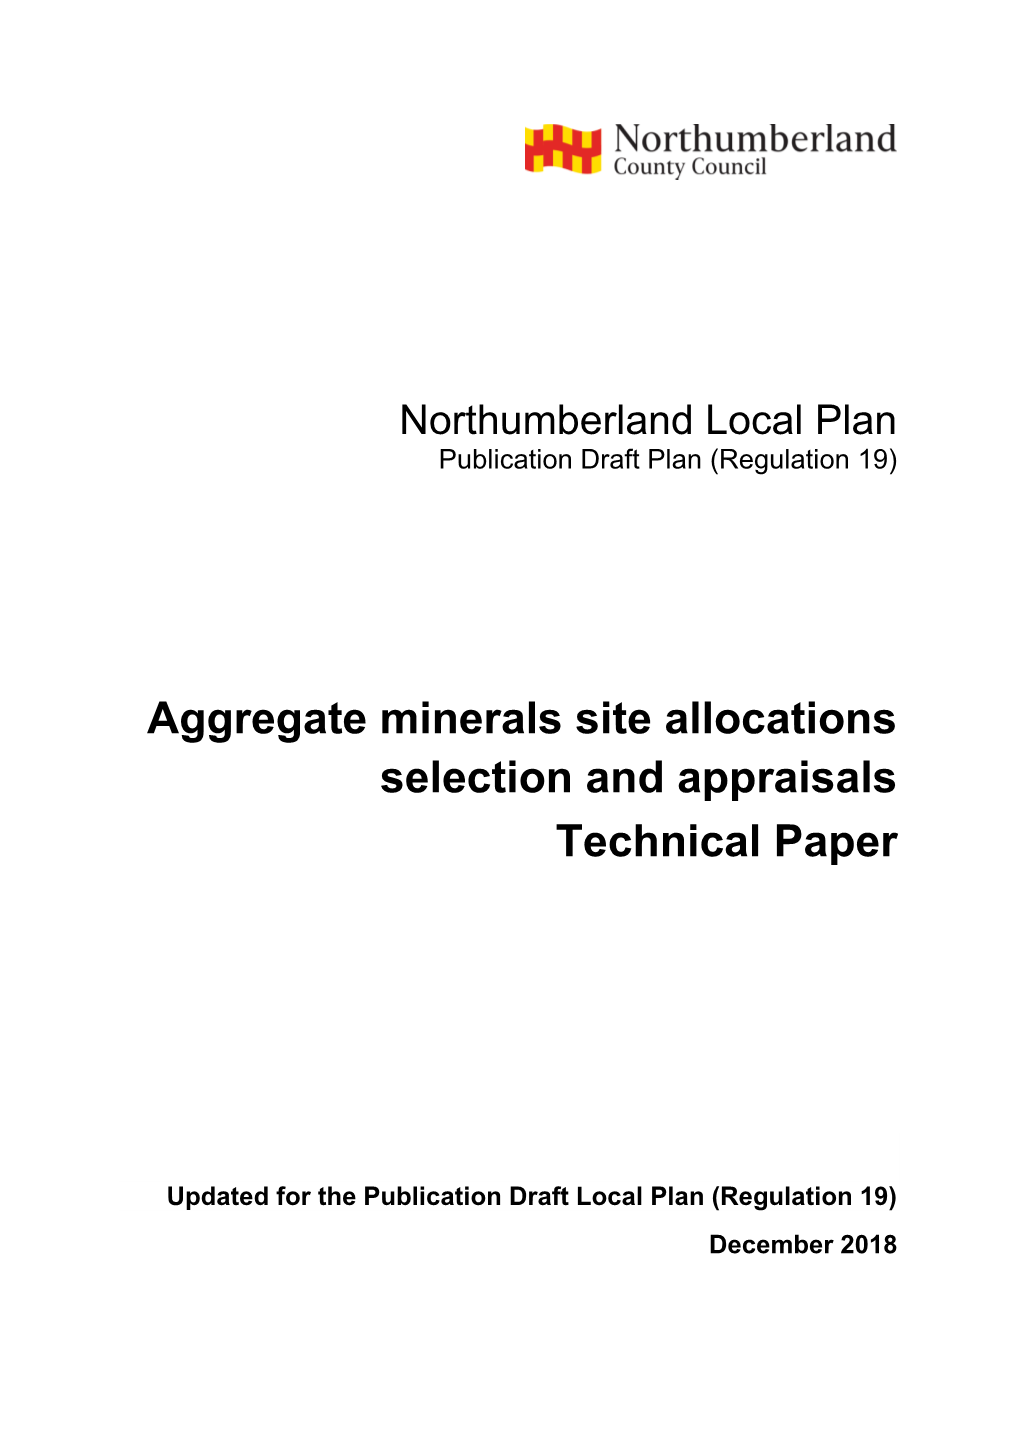 Aggregate Minerals Site Allocations Selection and Appraisals Technical Paper